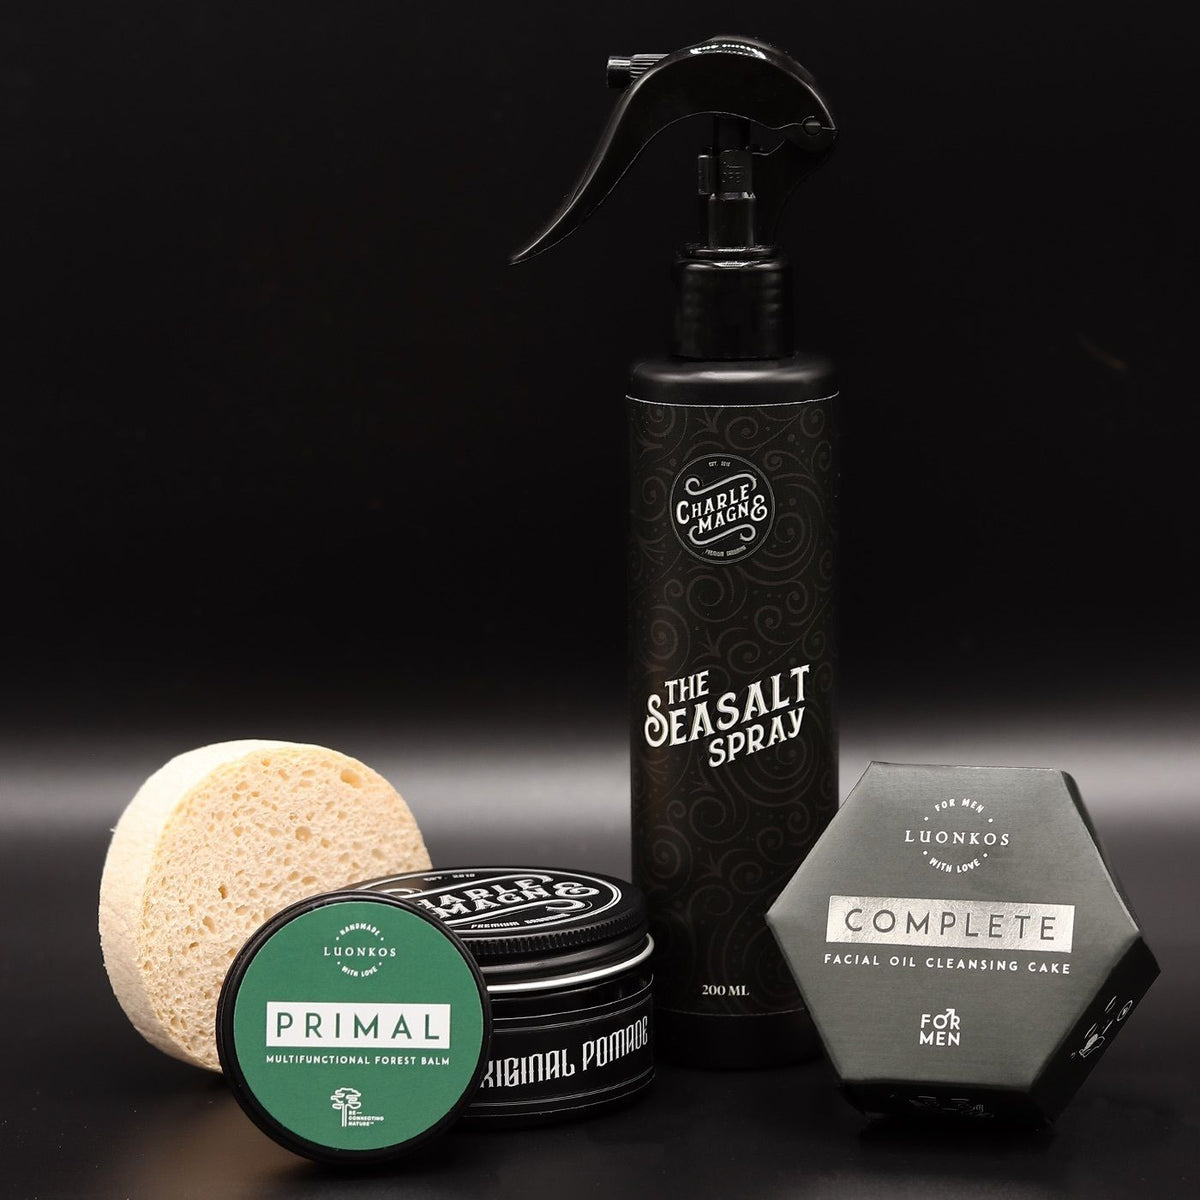 Luonkos x Charlemagne Classic - Gift package for men's hair and skincare.